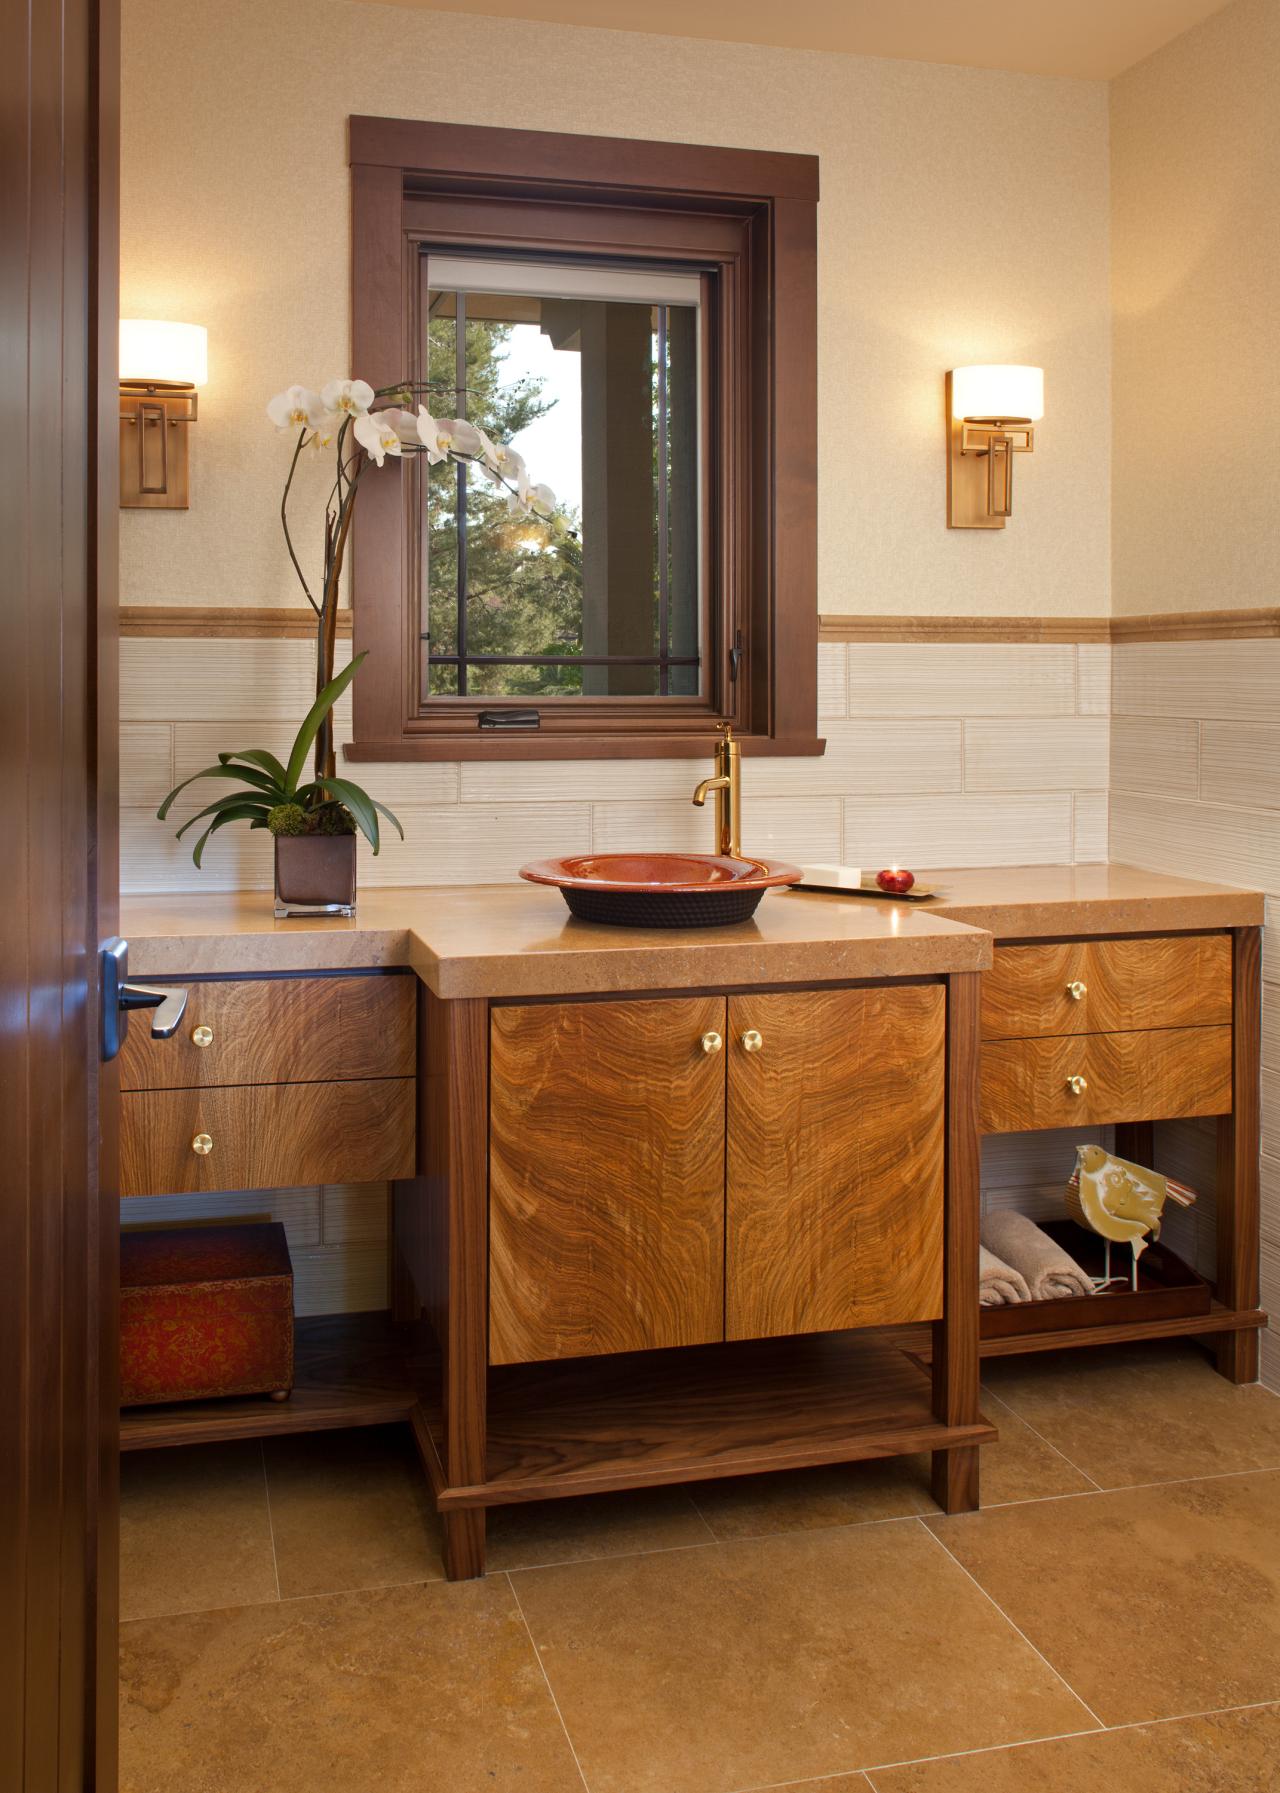 Craftsman Bathroom With Wooden Cabinets